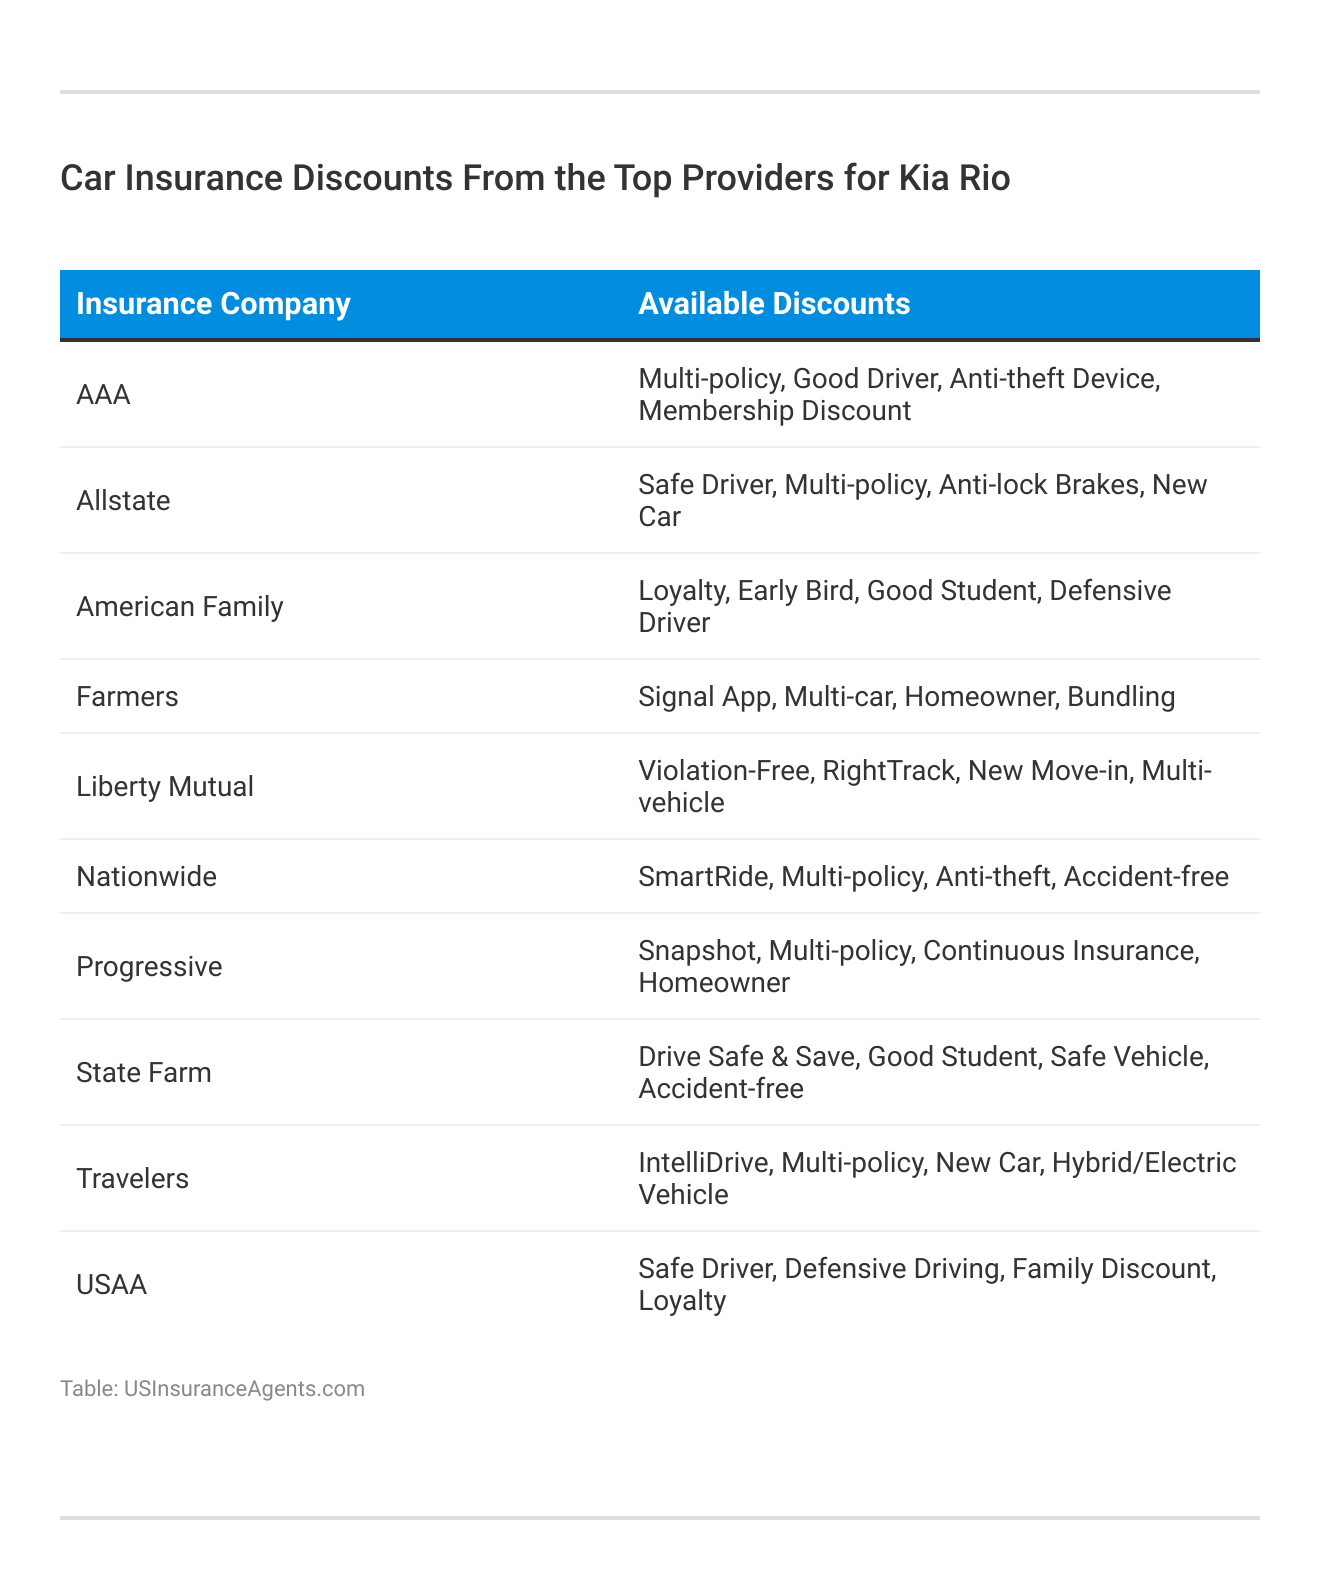 <h3>Car Insurance Discounts From the Top Providers for Kia Rio</h3>